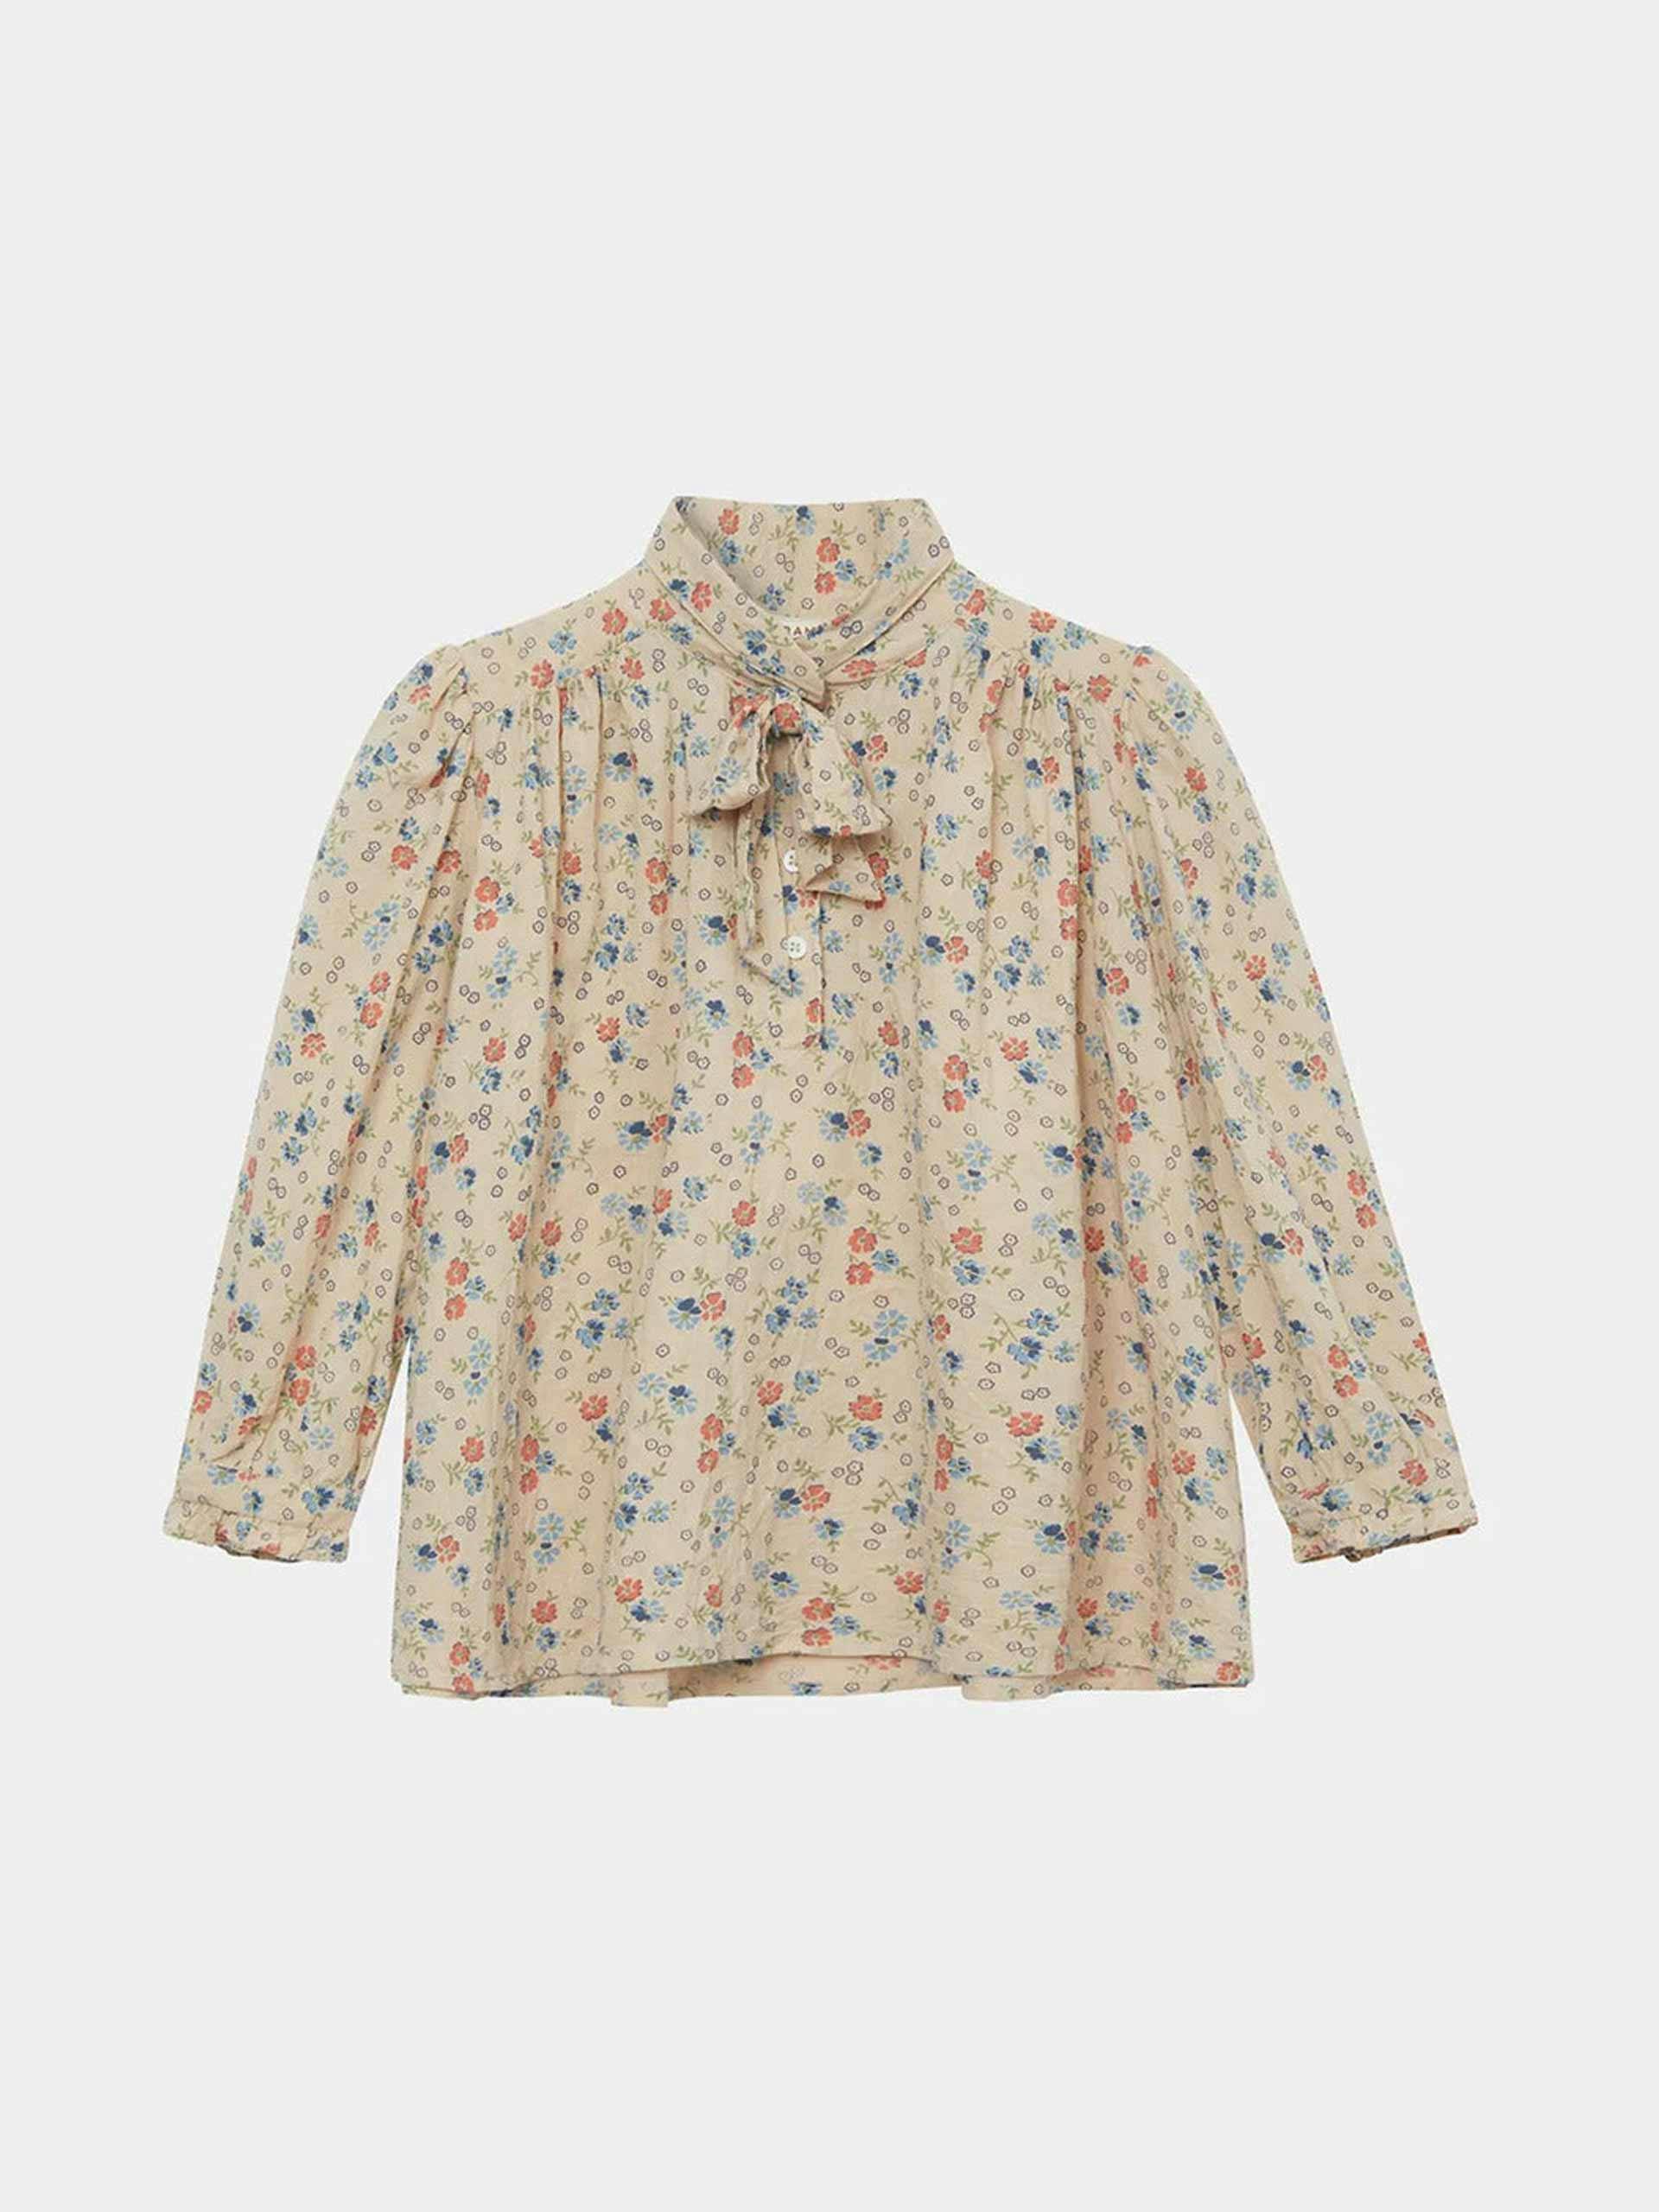 Folsom blouse - ditsy floral